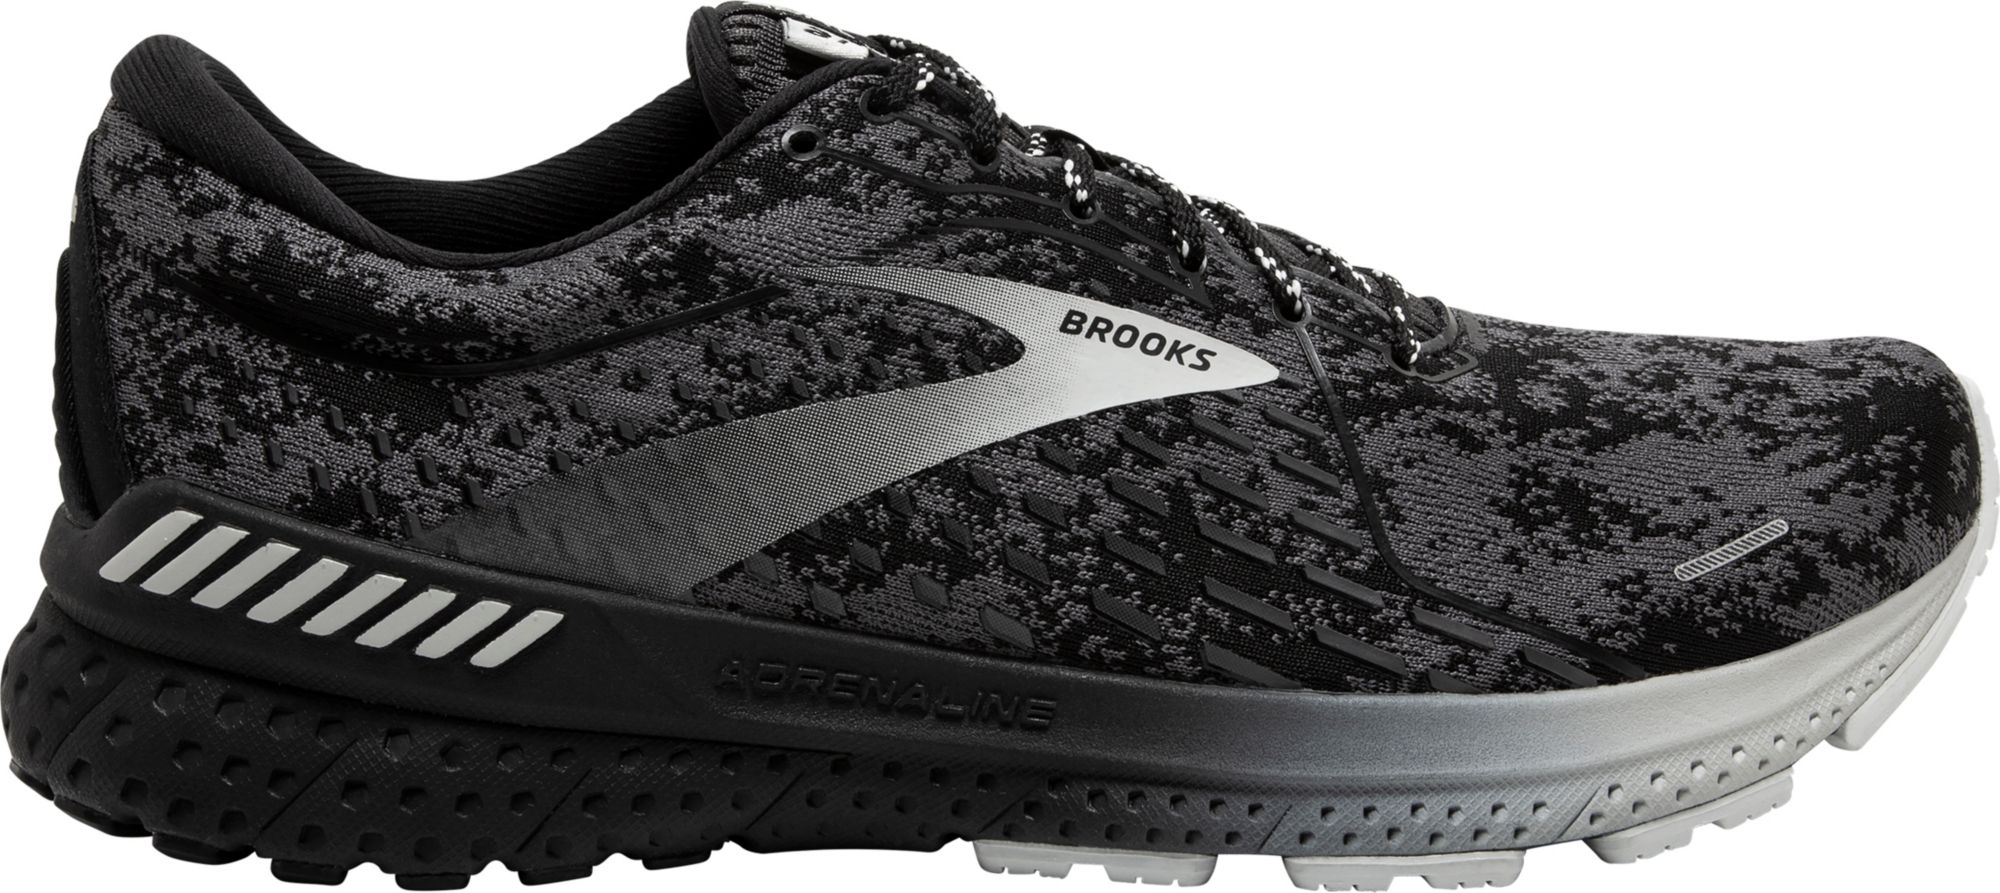 Brooks Running Shoes | Free Curbside 